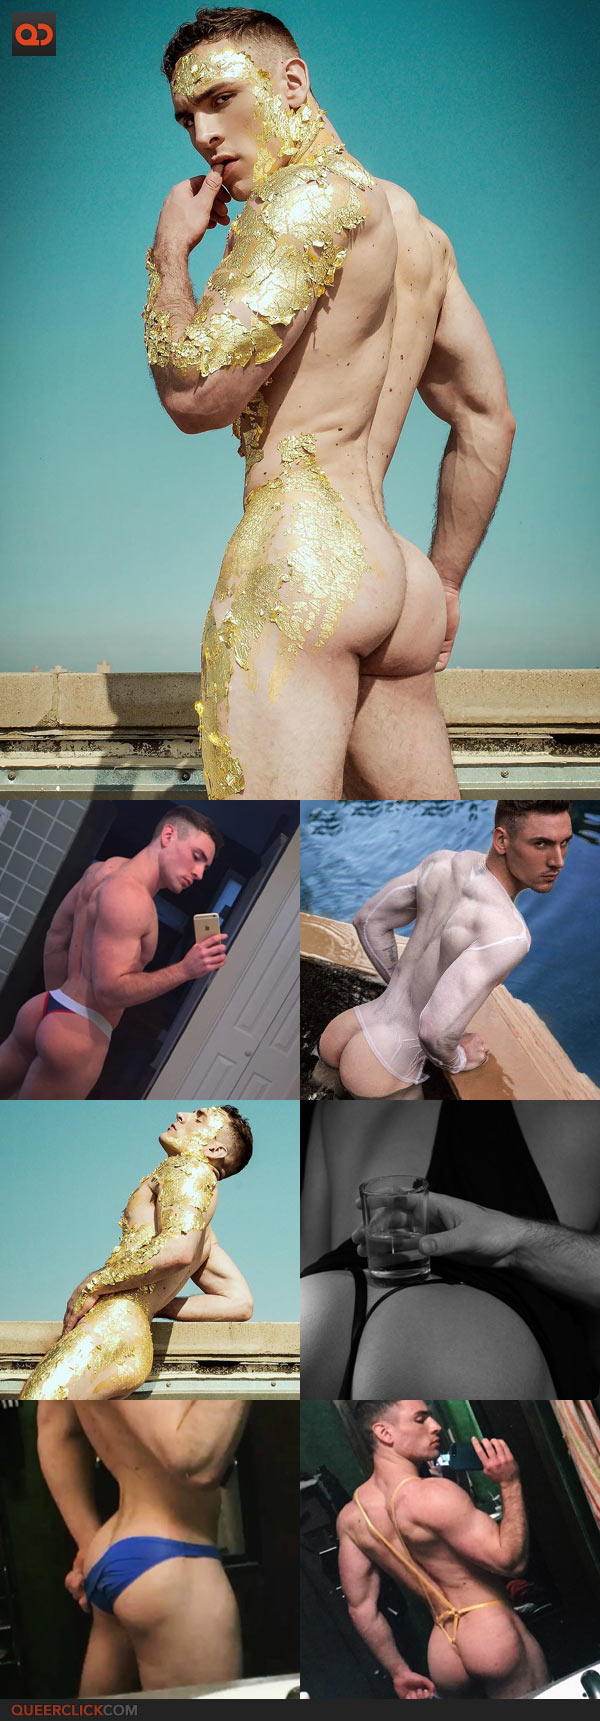 Ten Best Muscle Butts From Instagram You Need To Follow Right Now! - Part 2